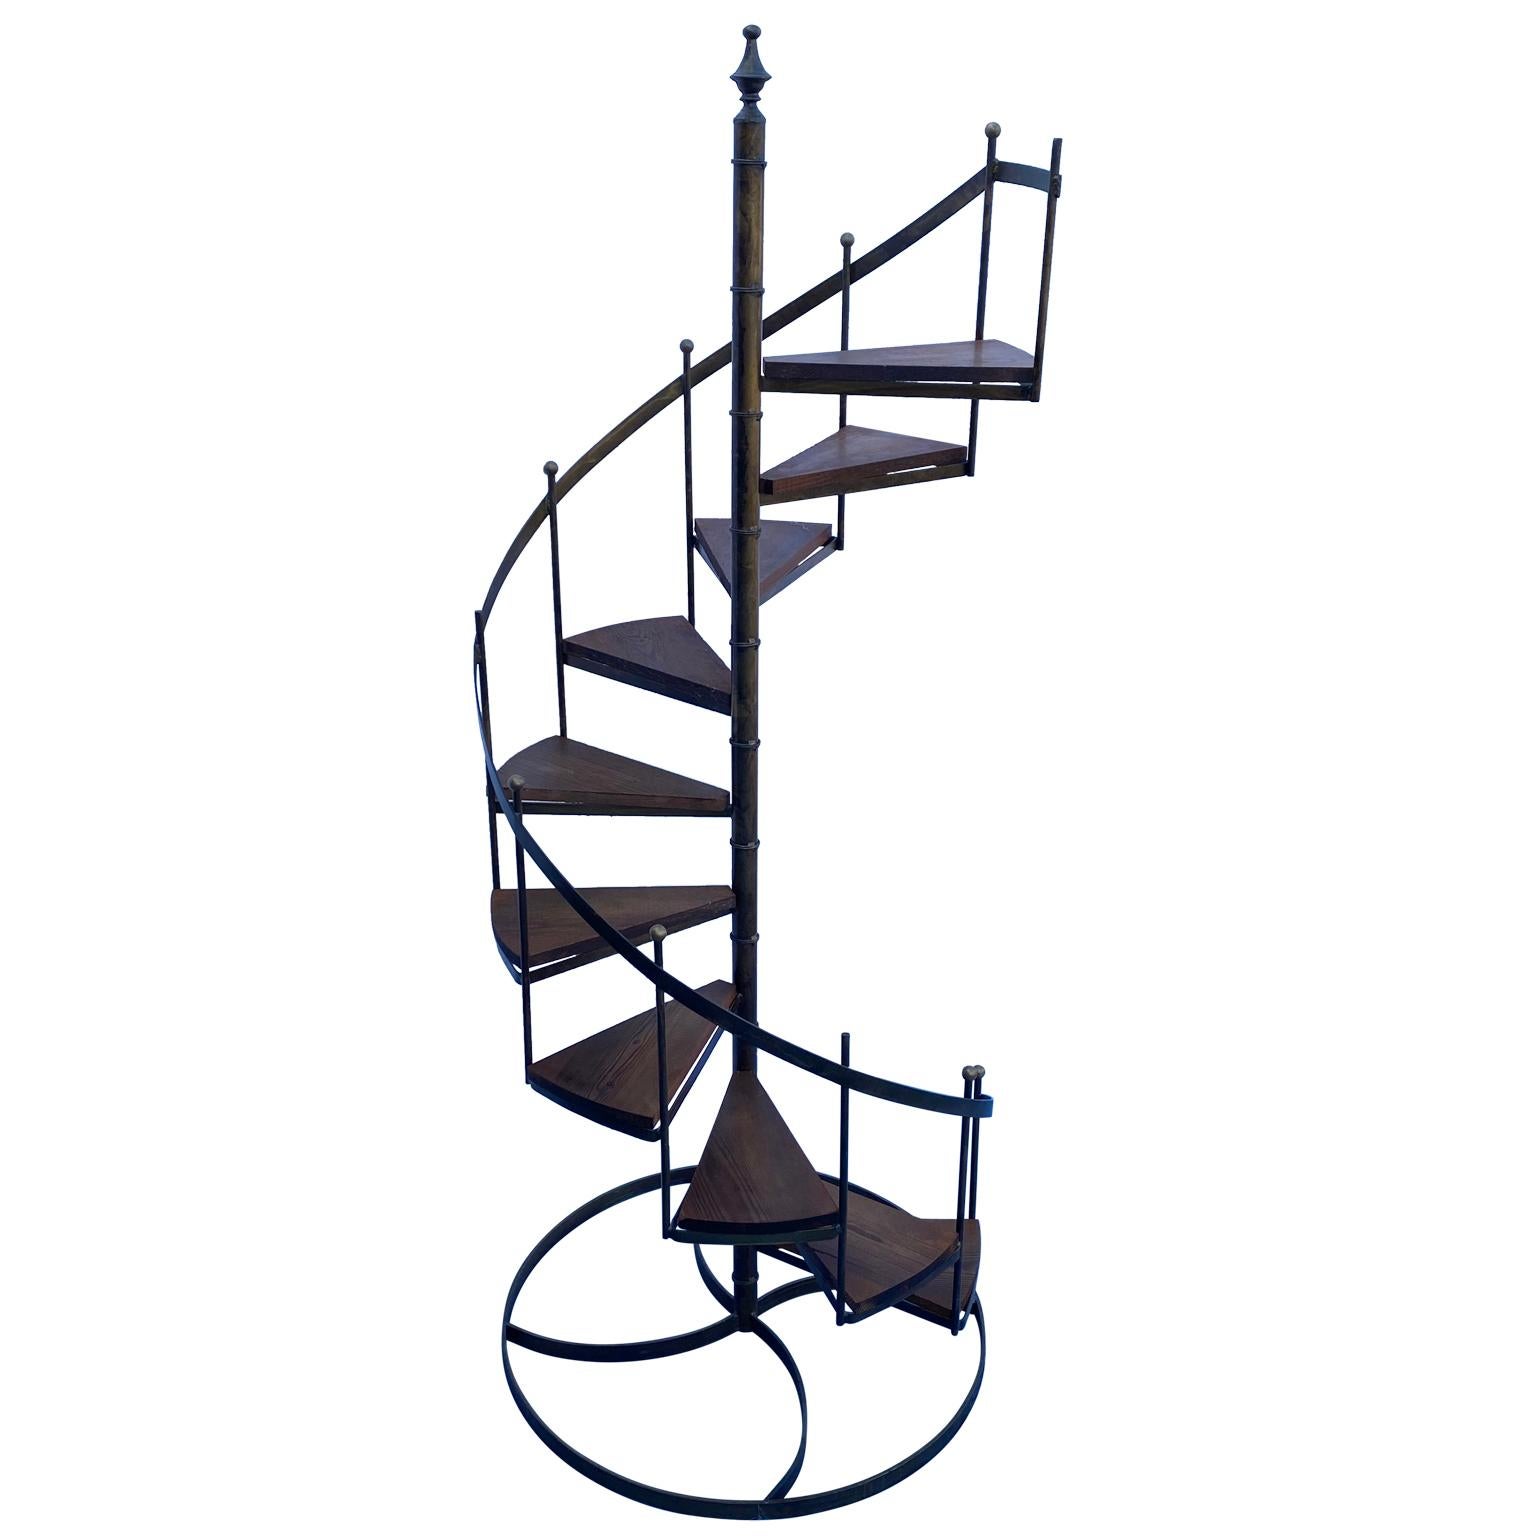 American Architectural Circular Wrought Iron Display Staircase